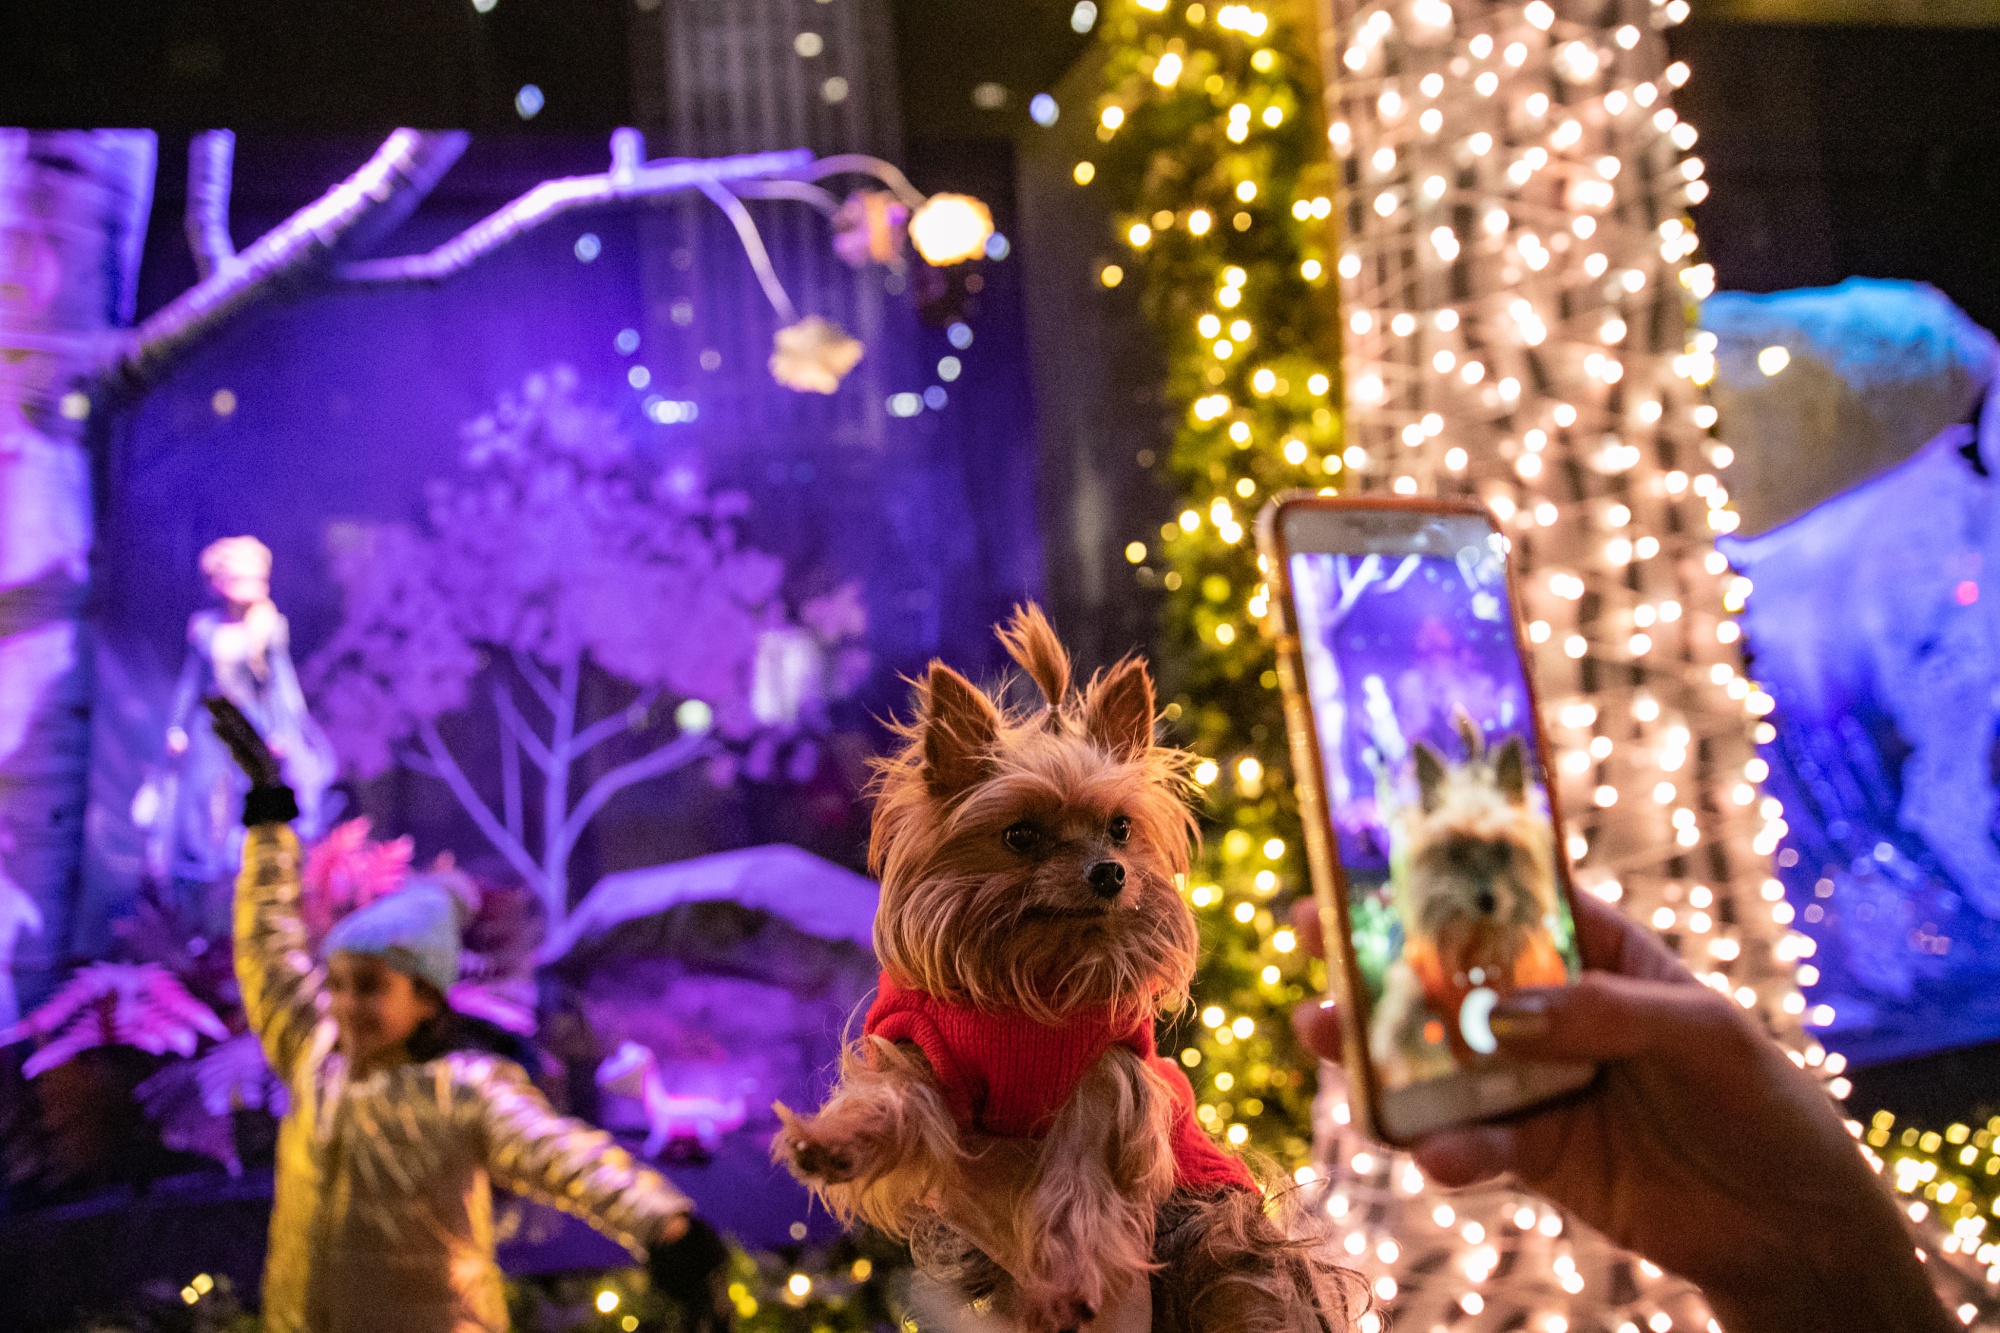 Saks Fifth Avenue Is Approaching Holiday Windows a Little Differently This  Year - Fashionista